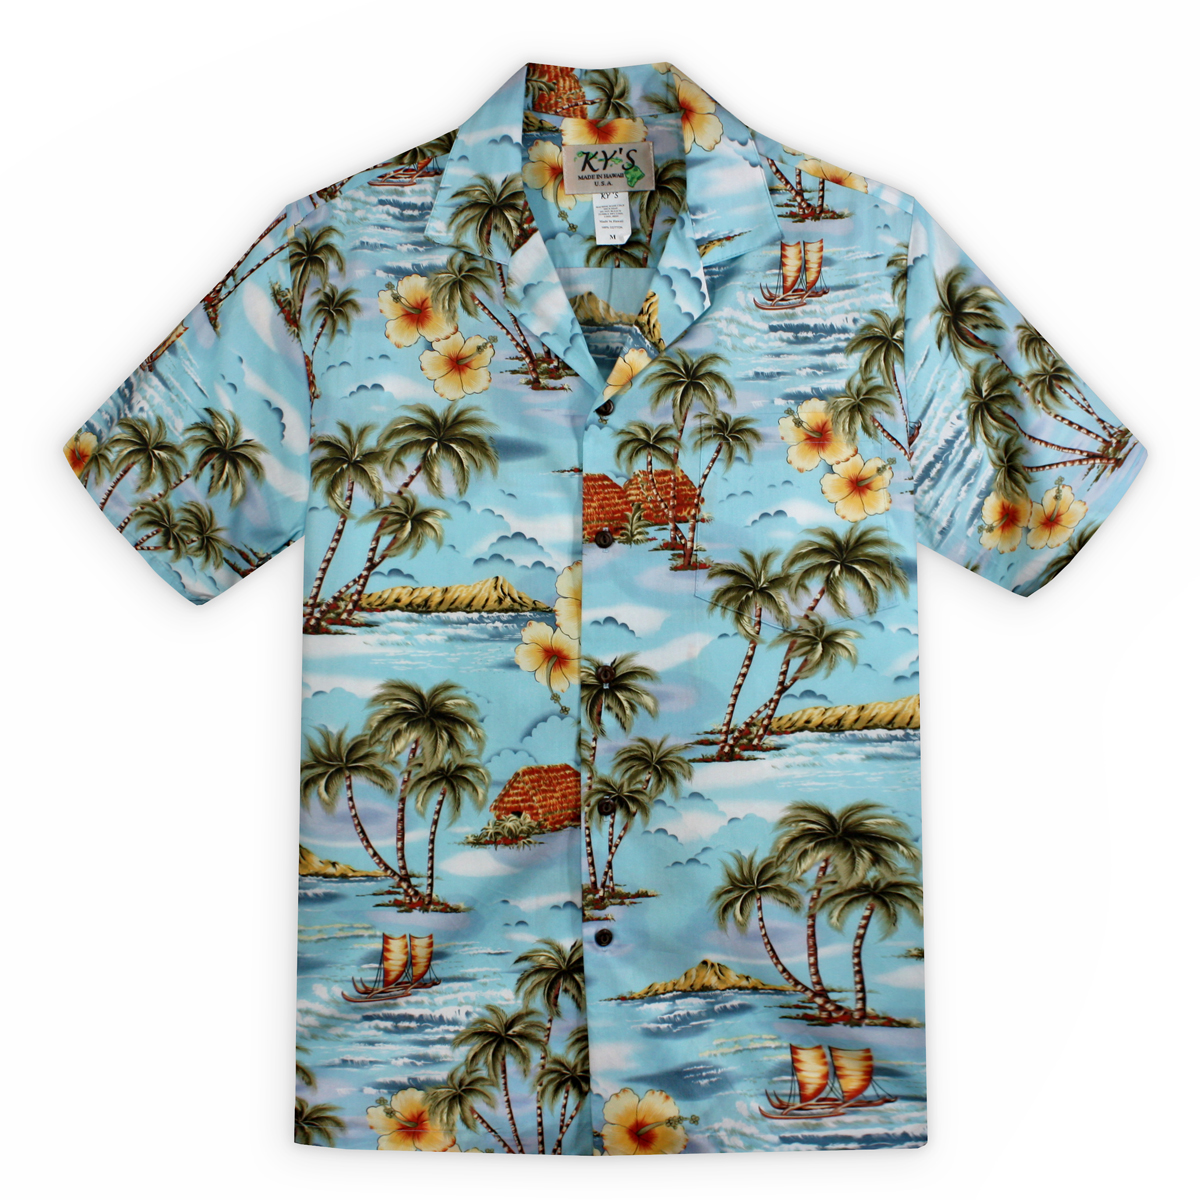 List 93+ Pictures Pictures Of Hawaiian Shirts Full HD, 2k, 4k